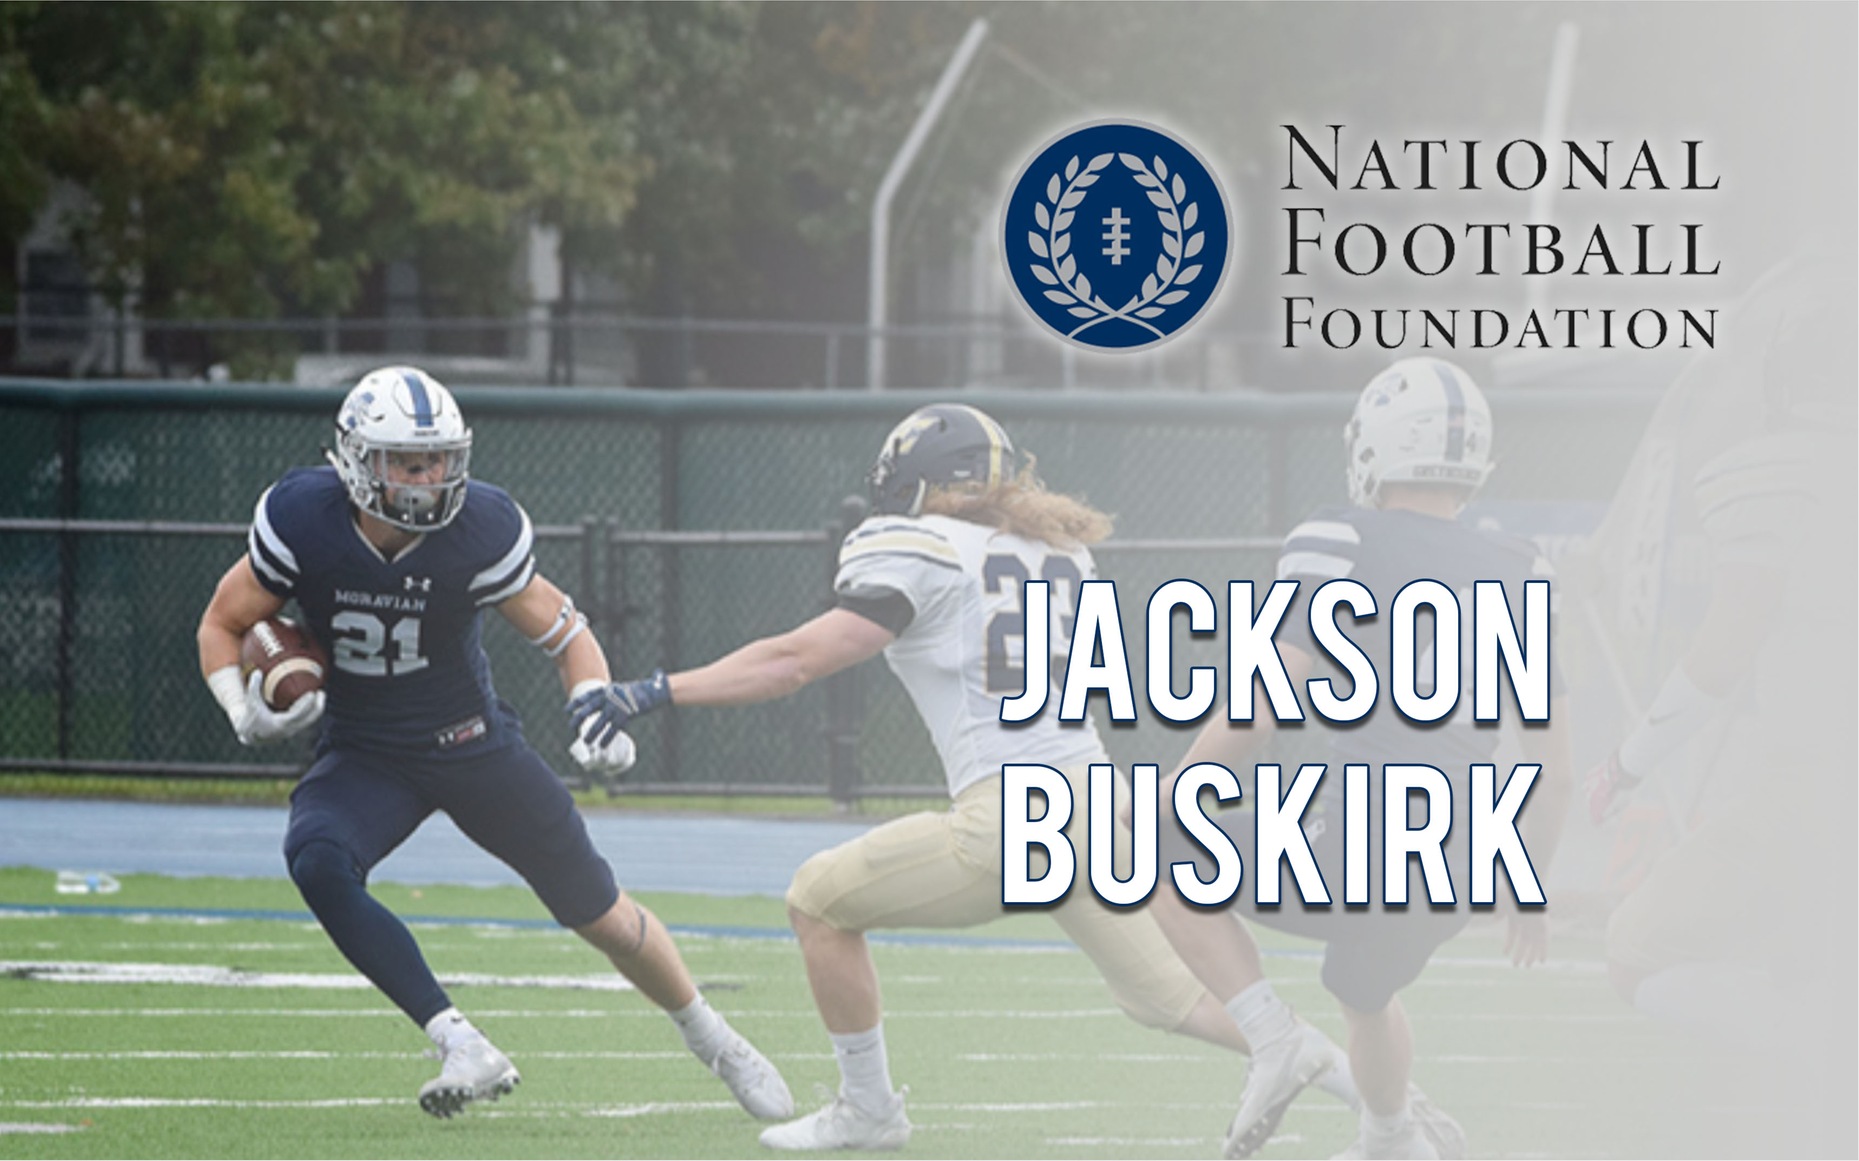 Jackson Buskirk returns a punt as the background for a graphic on him being named to the National Football Foundation's semifinalist for the 2020 William Campbell Trophy.